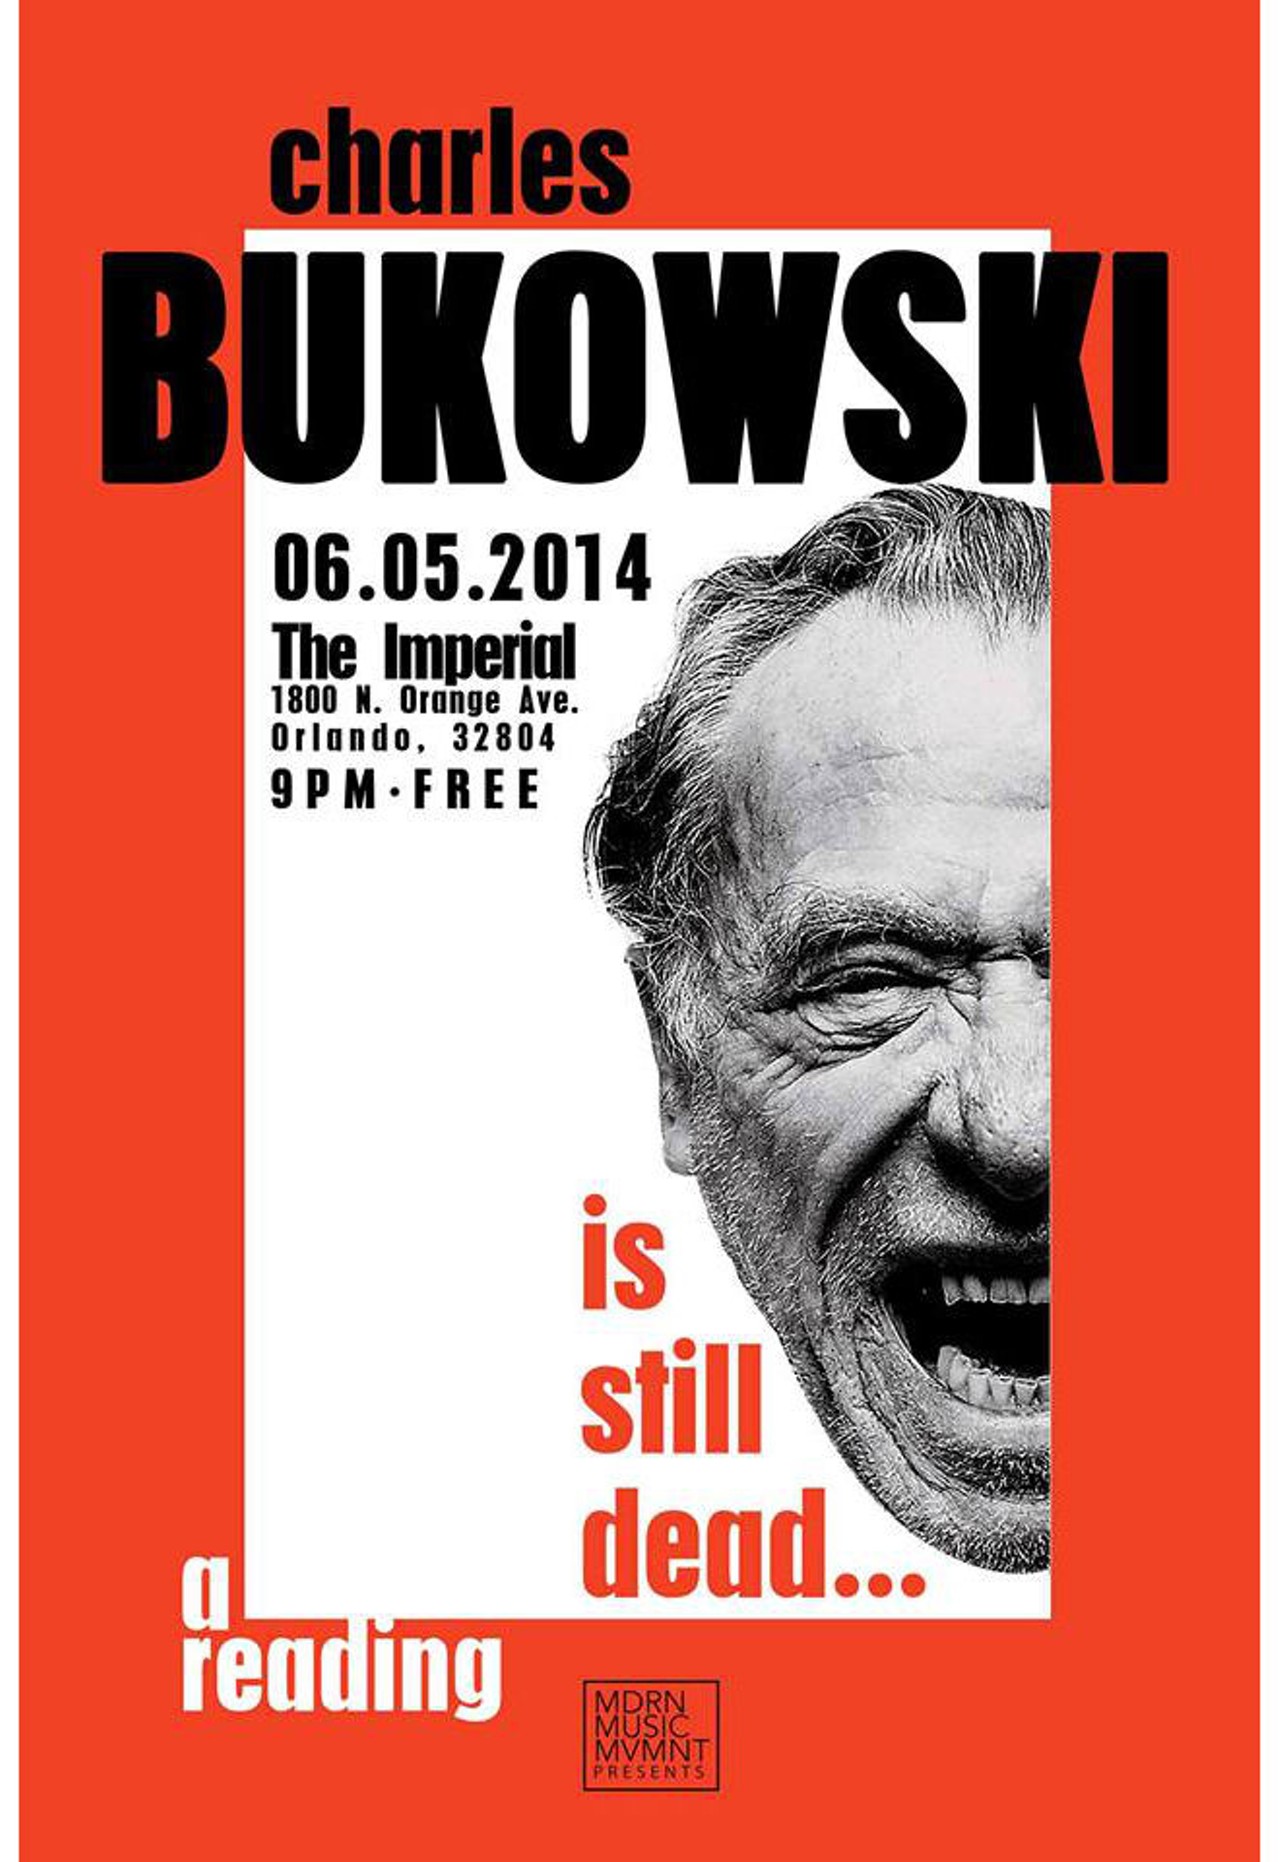 Thursday, June 5Charles Bukowski is Still DeadMontage reading of works by Charles Bukowski. Readers include Megan Faubel, Tod Caviness and Robert English.